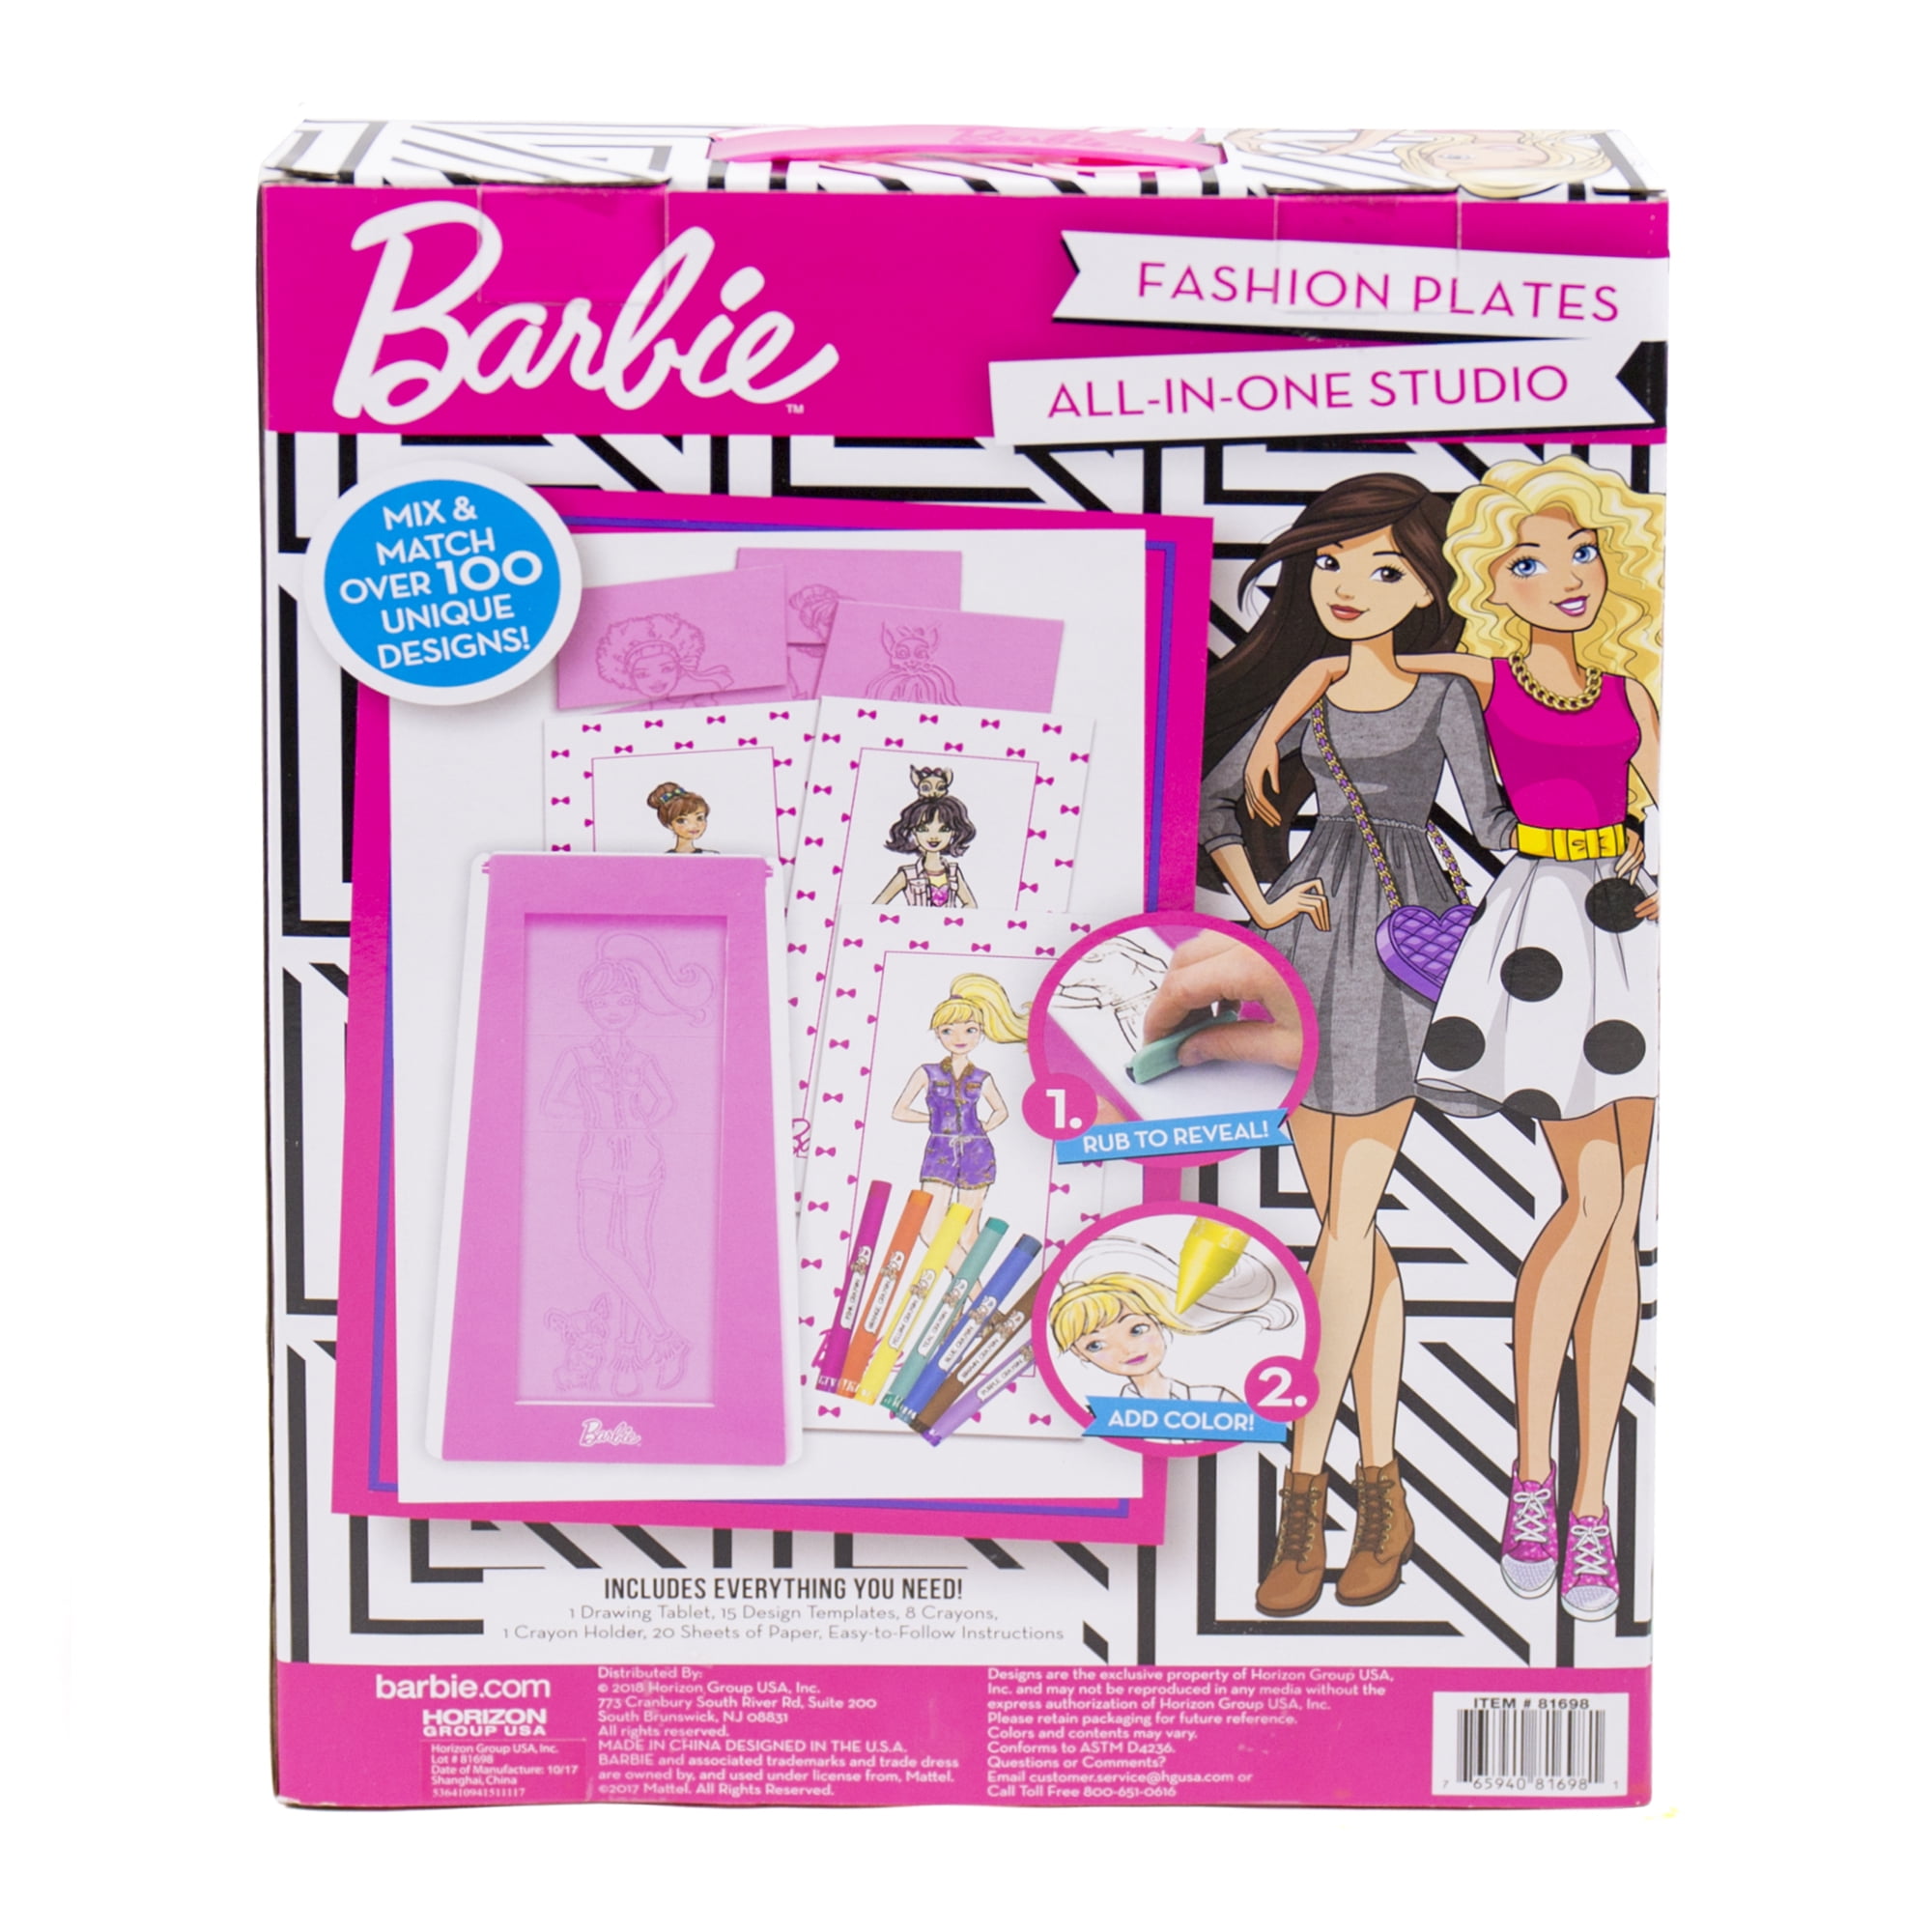 Barbie Mix and Match Fashion Plates, Art & Craft Kits, Boys and Girls,  Child, Ages 6+